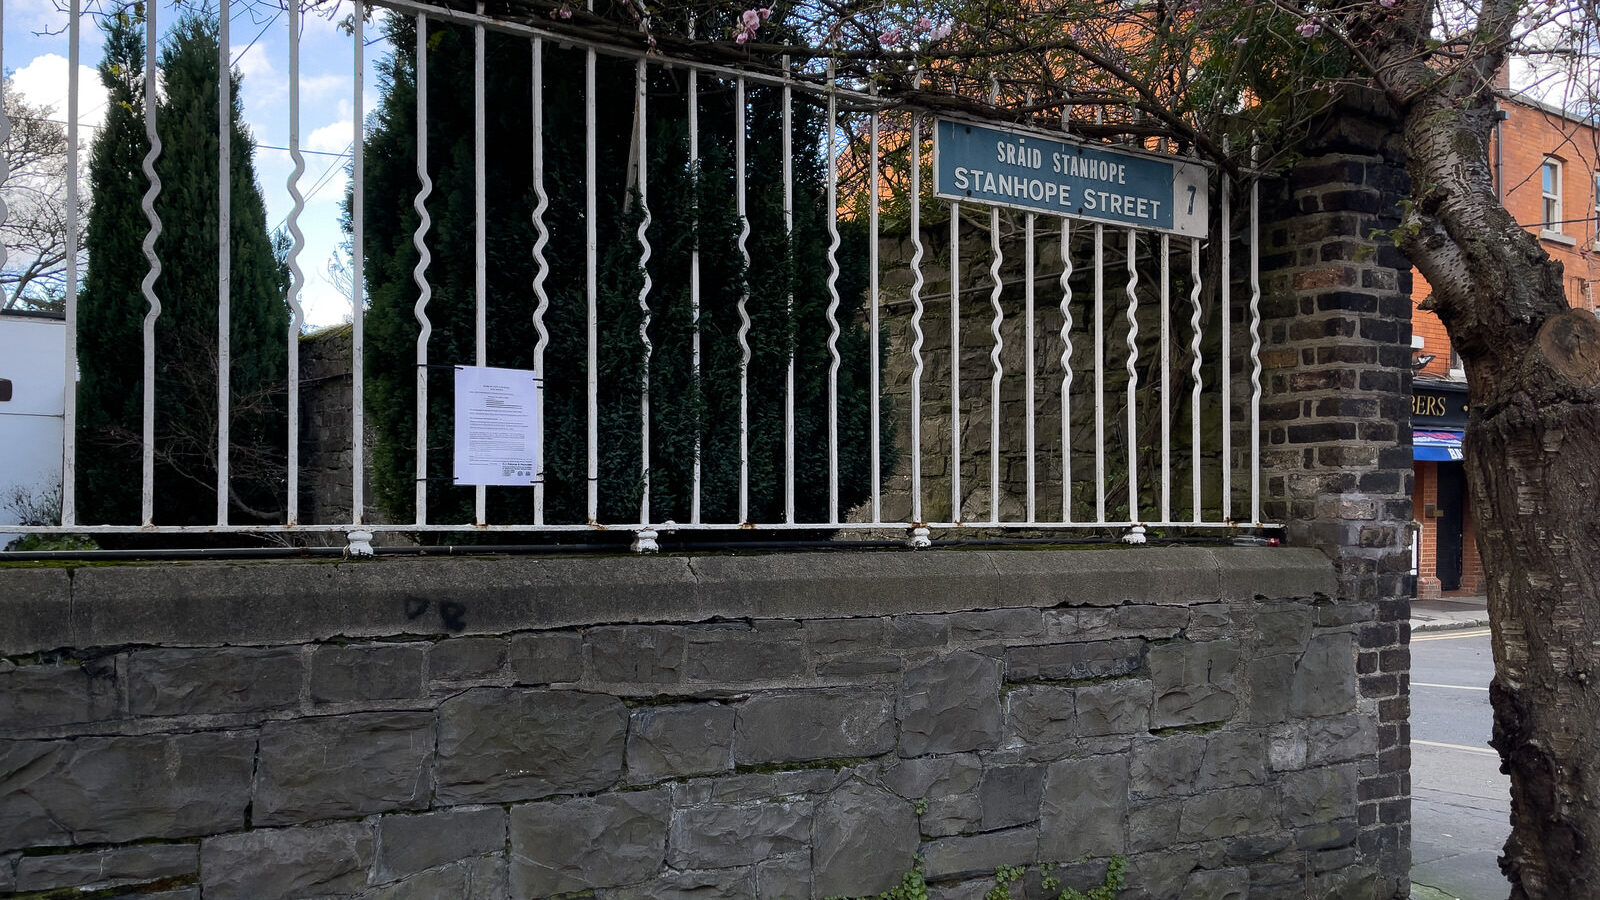 EXPLORING GRANGEGORMAN LOWER [WHICH IS BOTH A STREET AND AN AREA OR DISTRICT]-229018-1